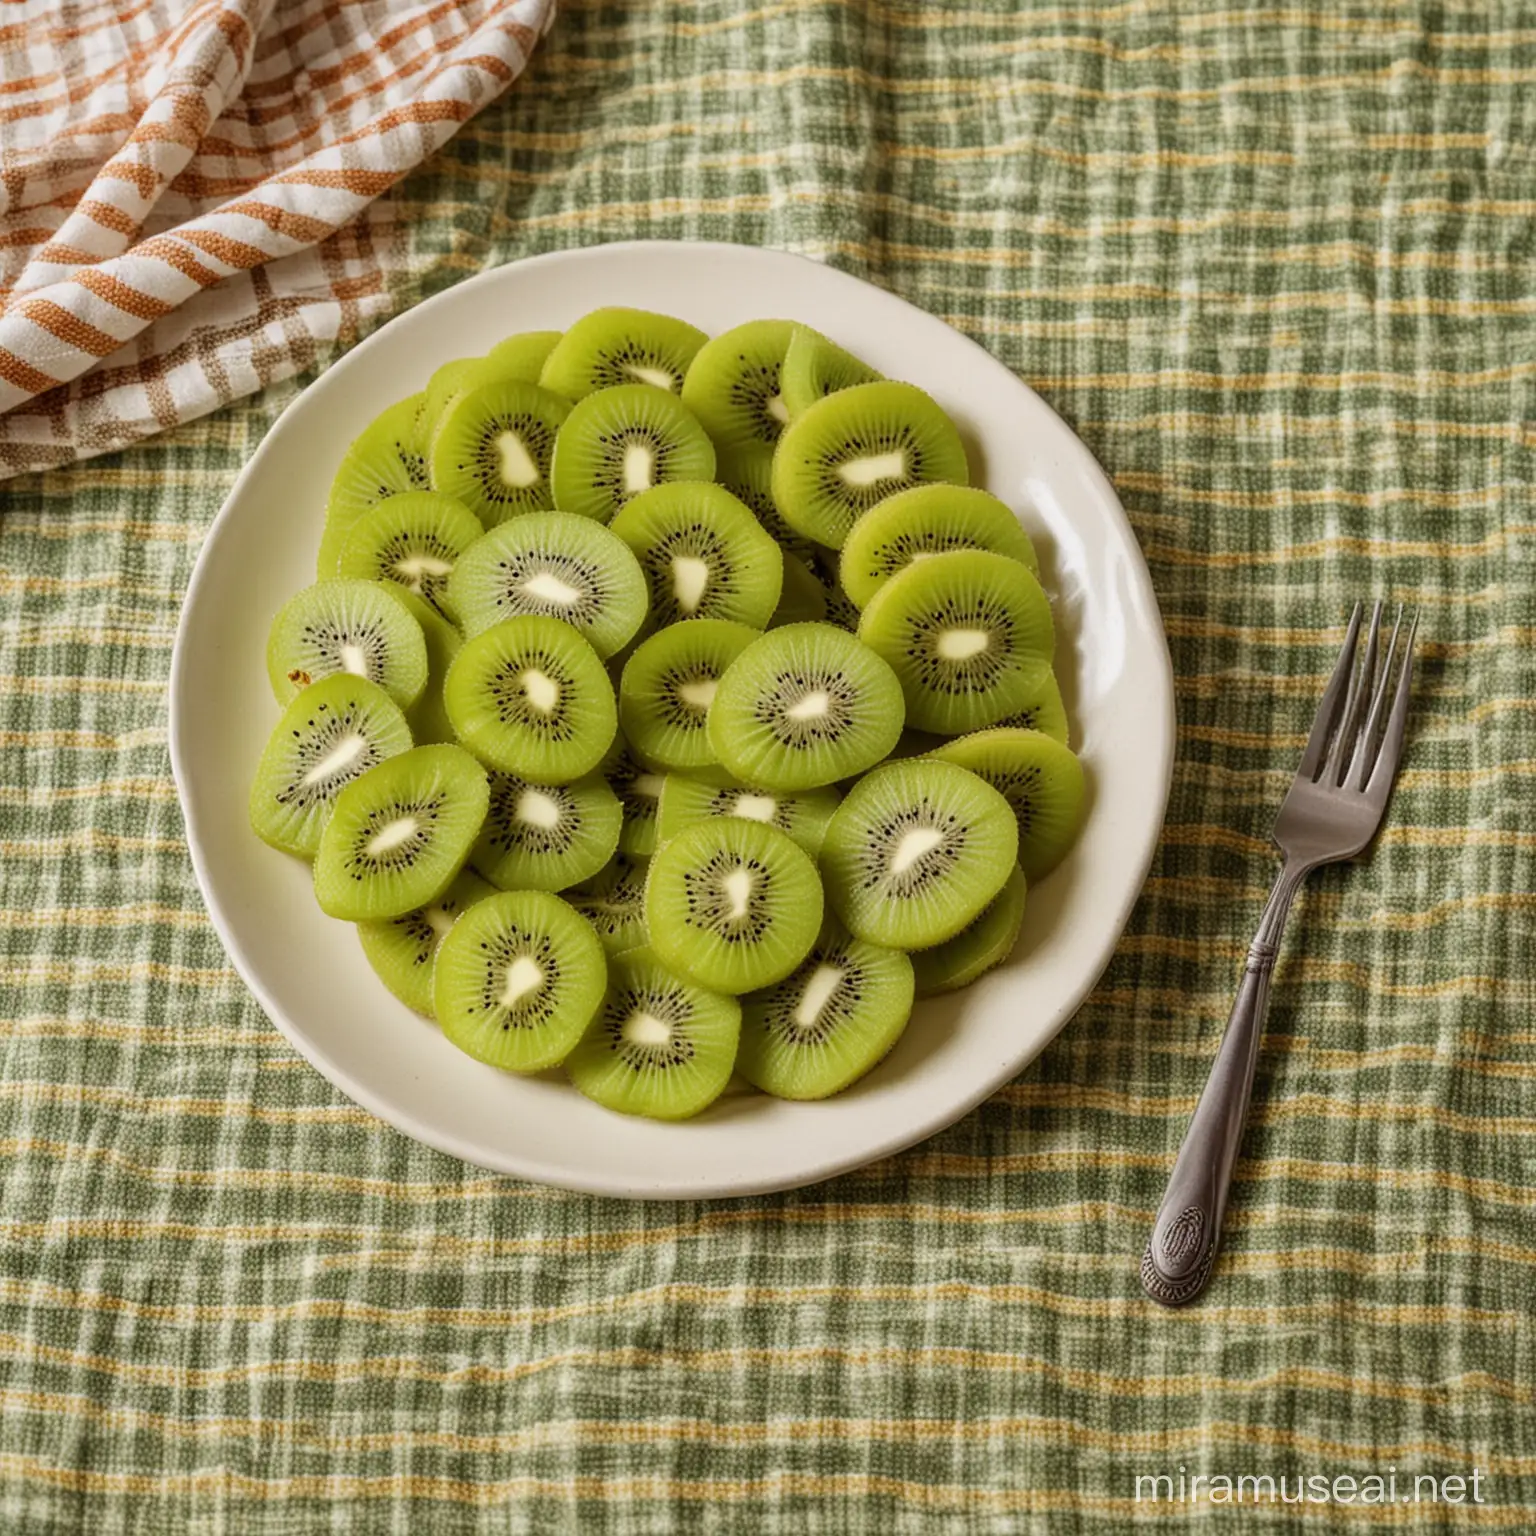 kiwi slices in a plate on a table with a nice tablecloth